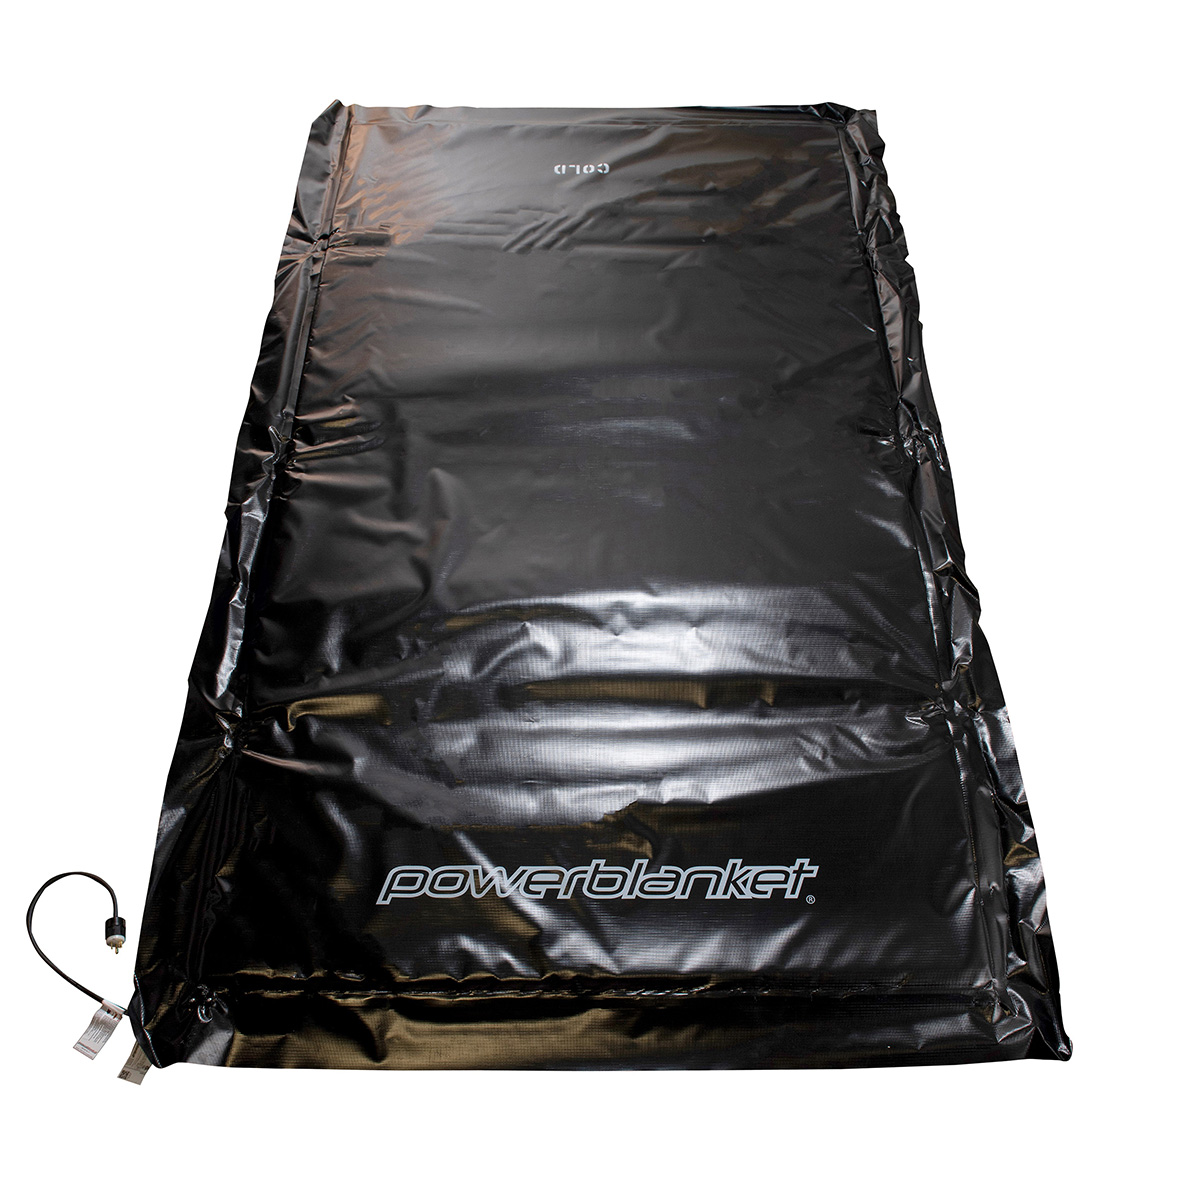 Powerblanket Cure Pro 3 ft. x 10 ft. Heated Concrete Curing Blanket Rugged Industrial Pro Model